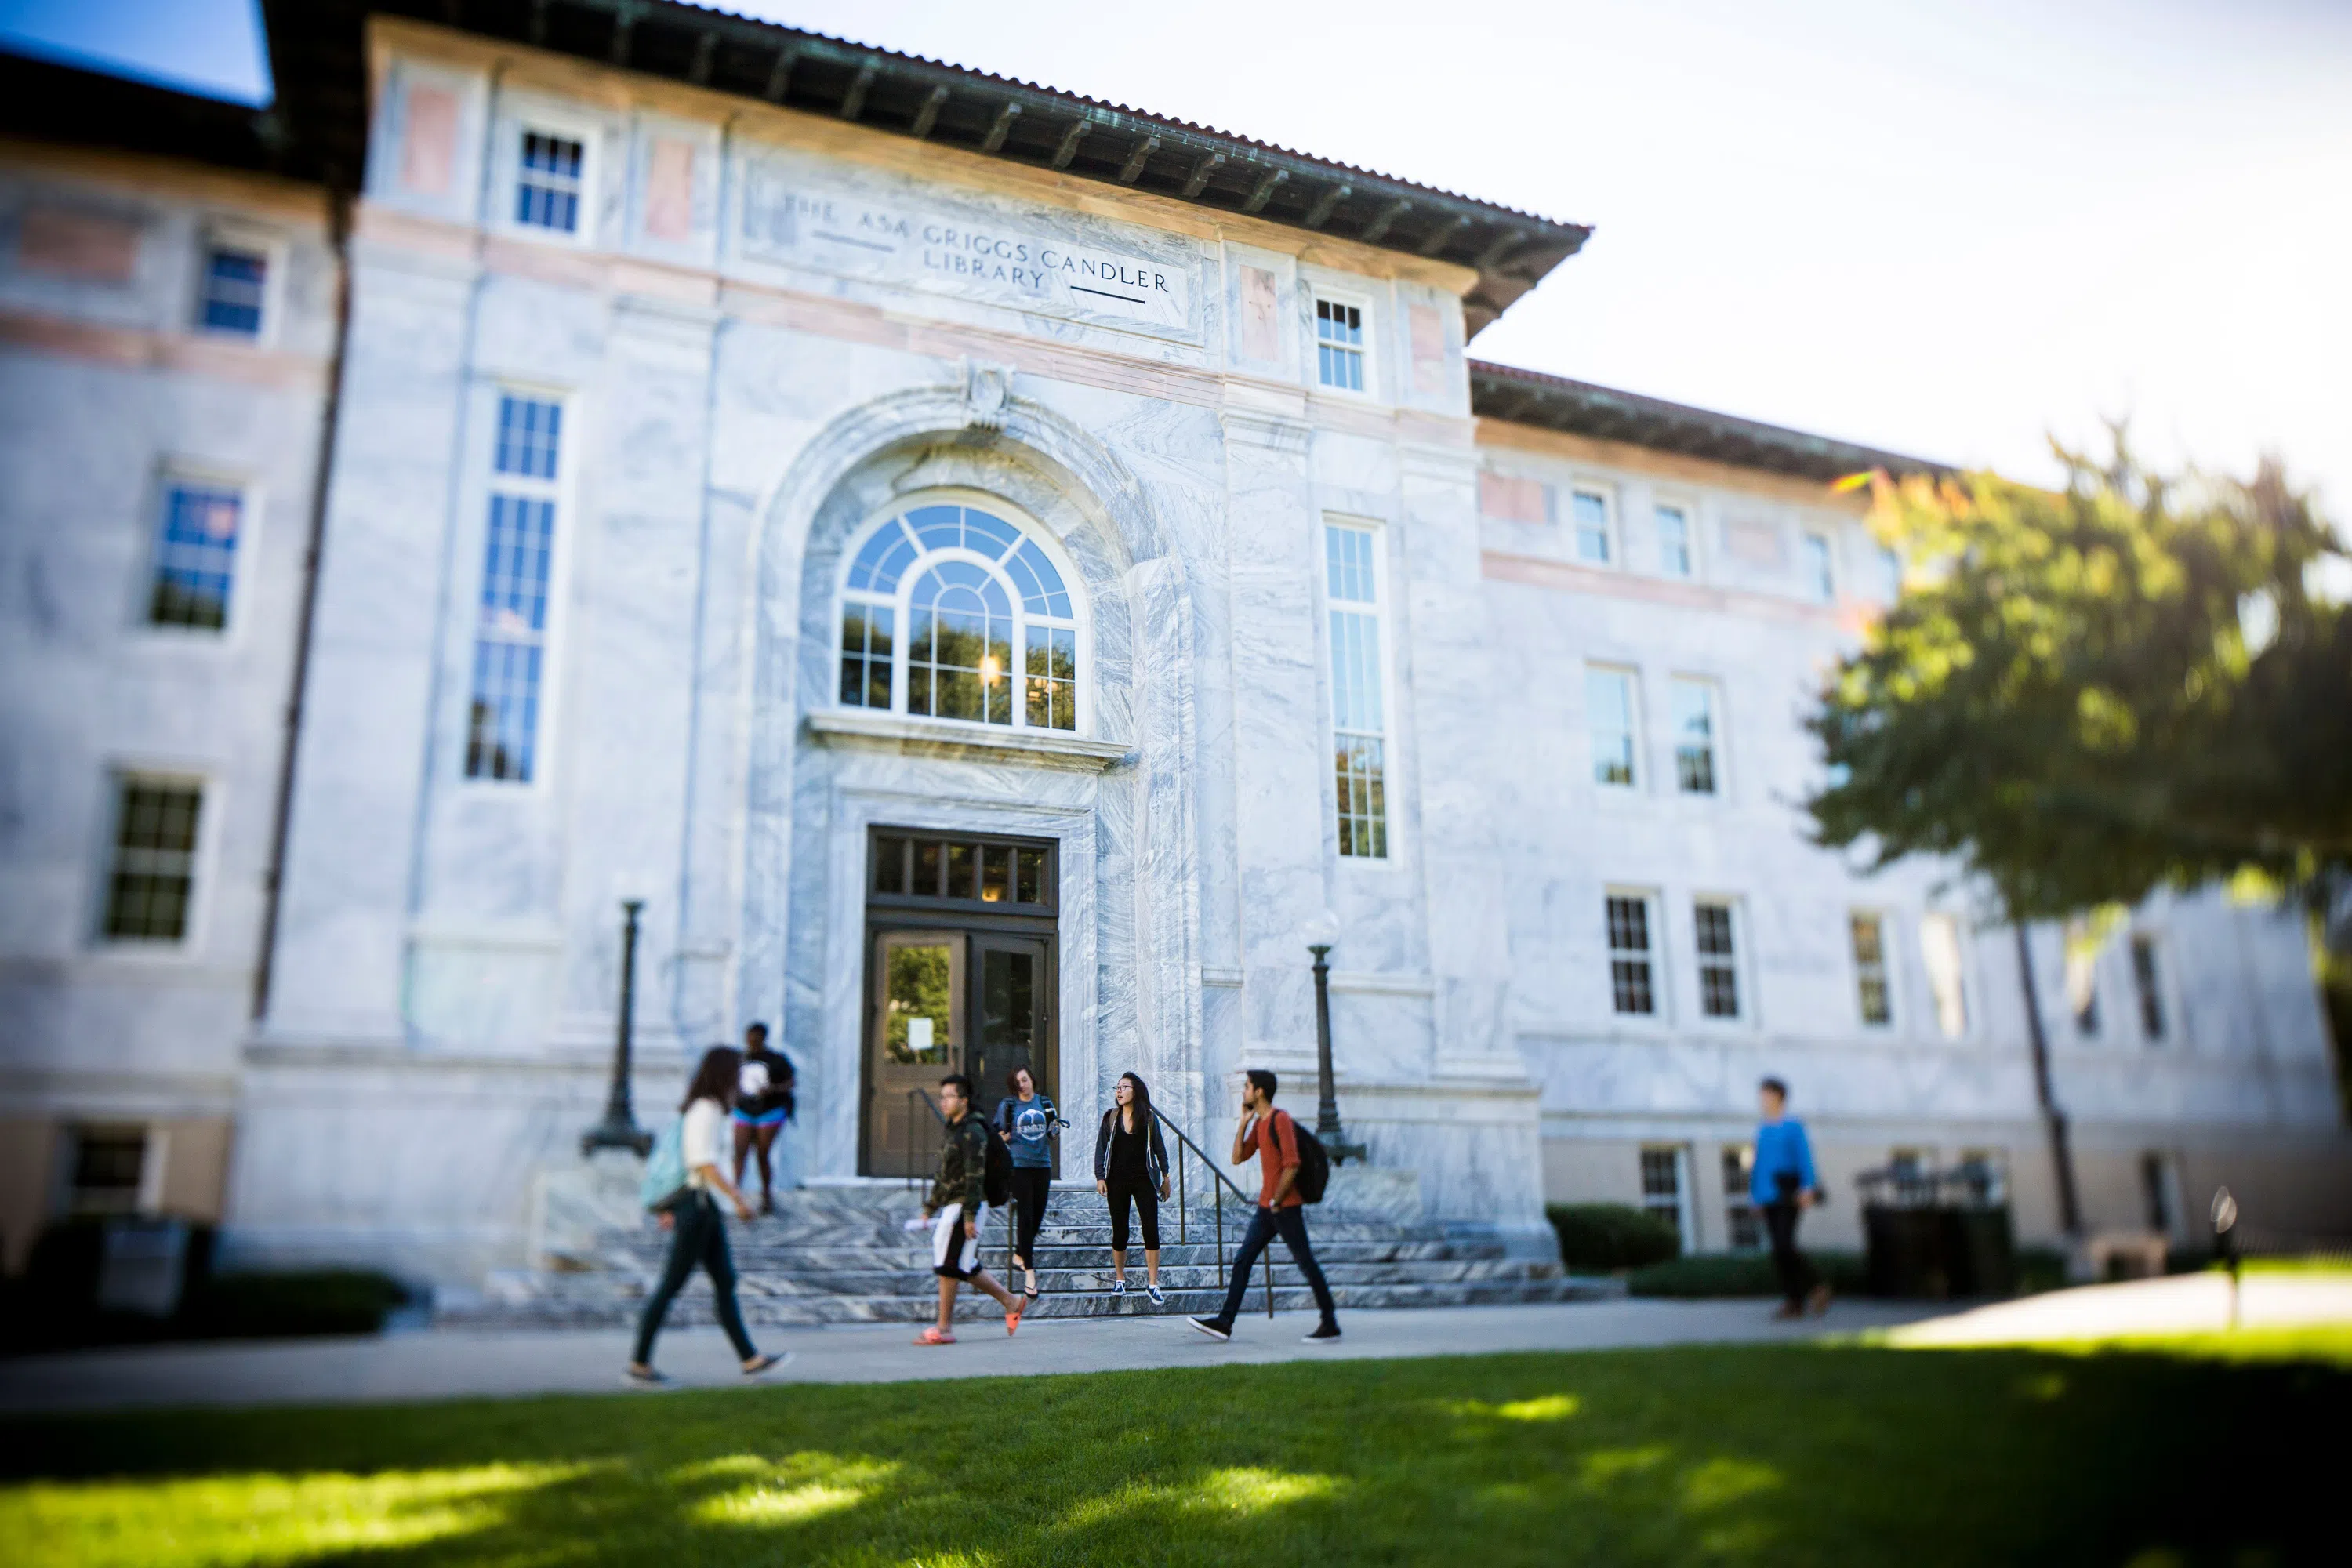 Image of Candler Library at Emory University